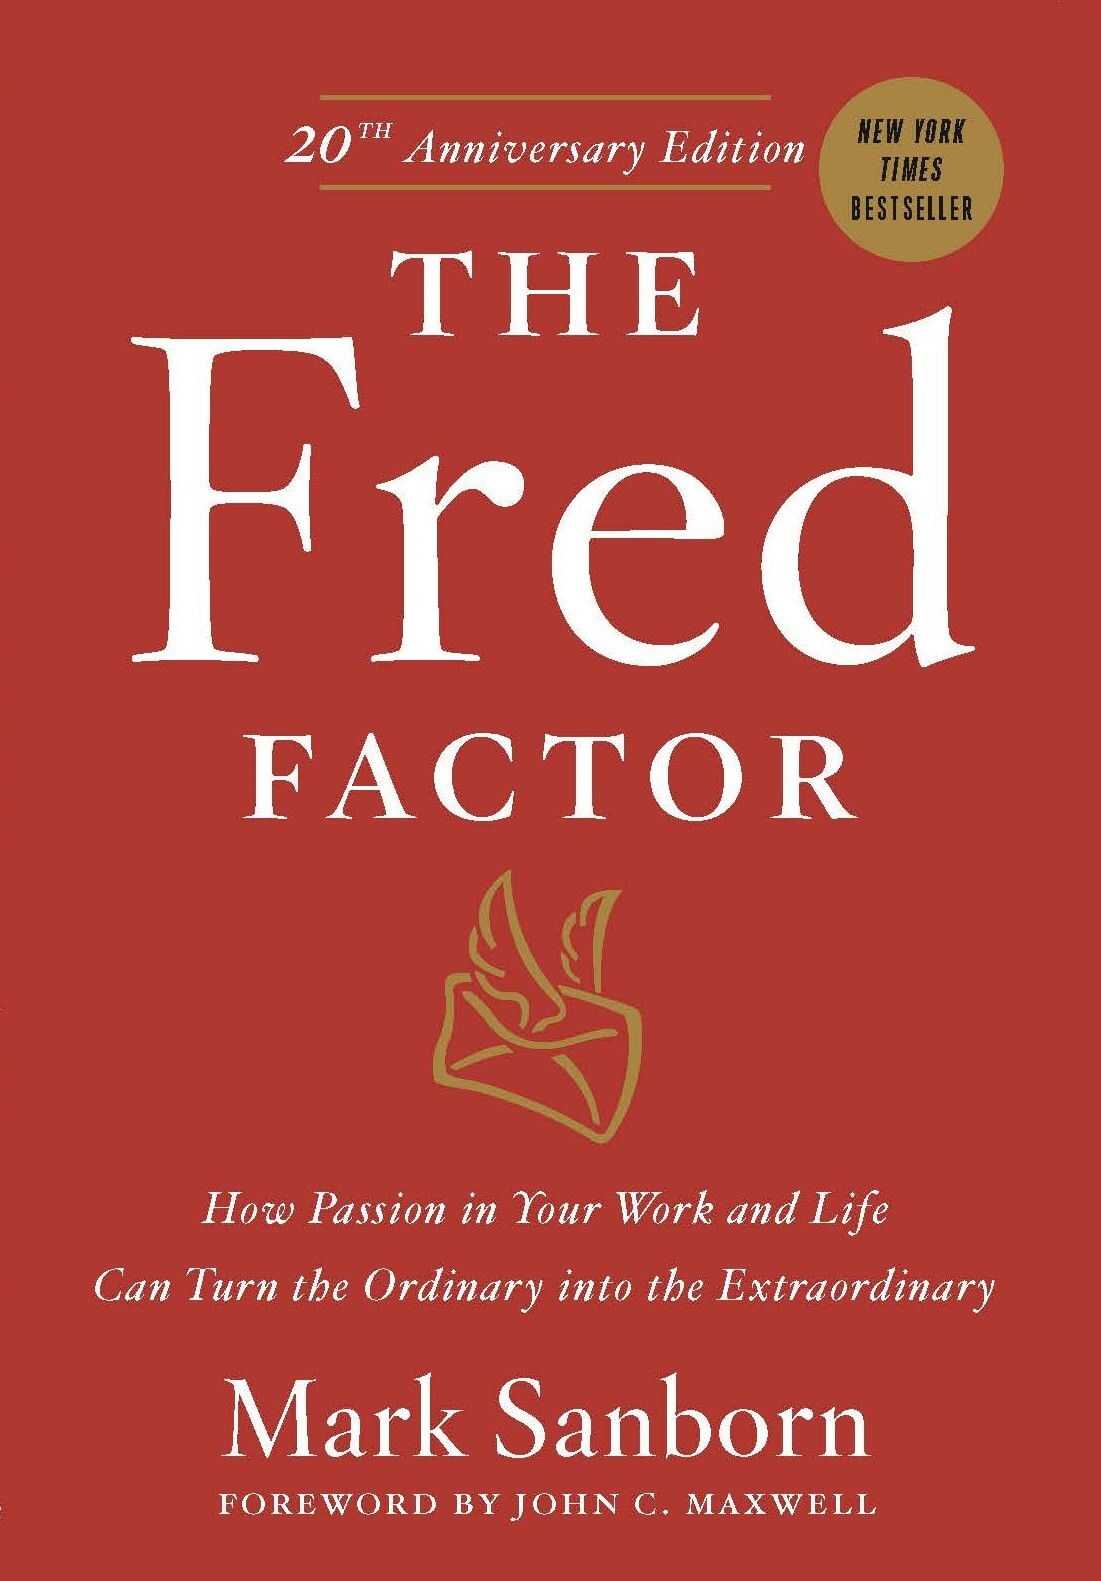 The Fred Factor: How Passion in Your Work and Life Can Turn the Ordinary Into the Extraordinary